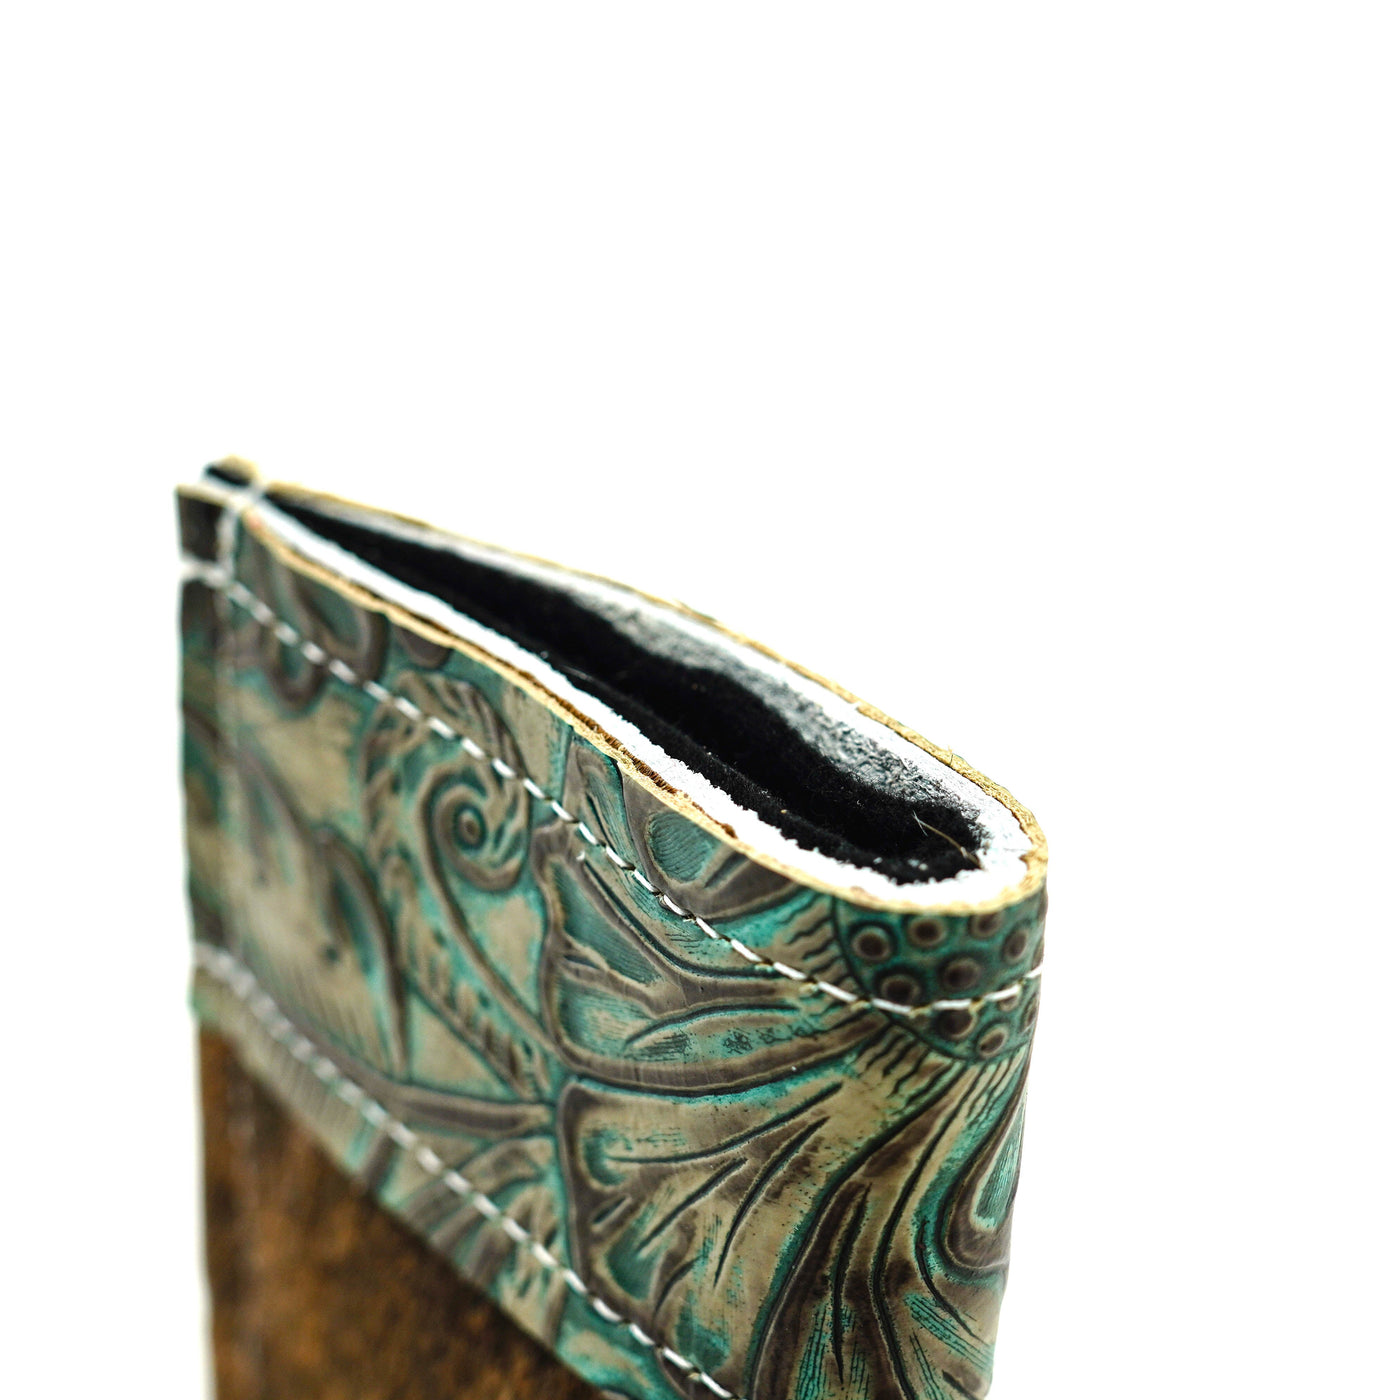 Sunglass Case - Brindle w/ Turquoise Autumn-Sunglass Case-Western-Cowhide-Bags-Handmade-Products-Gifts-Dancing Cactus Designs